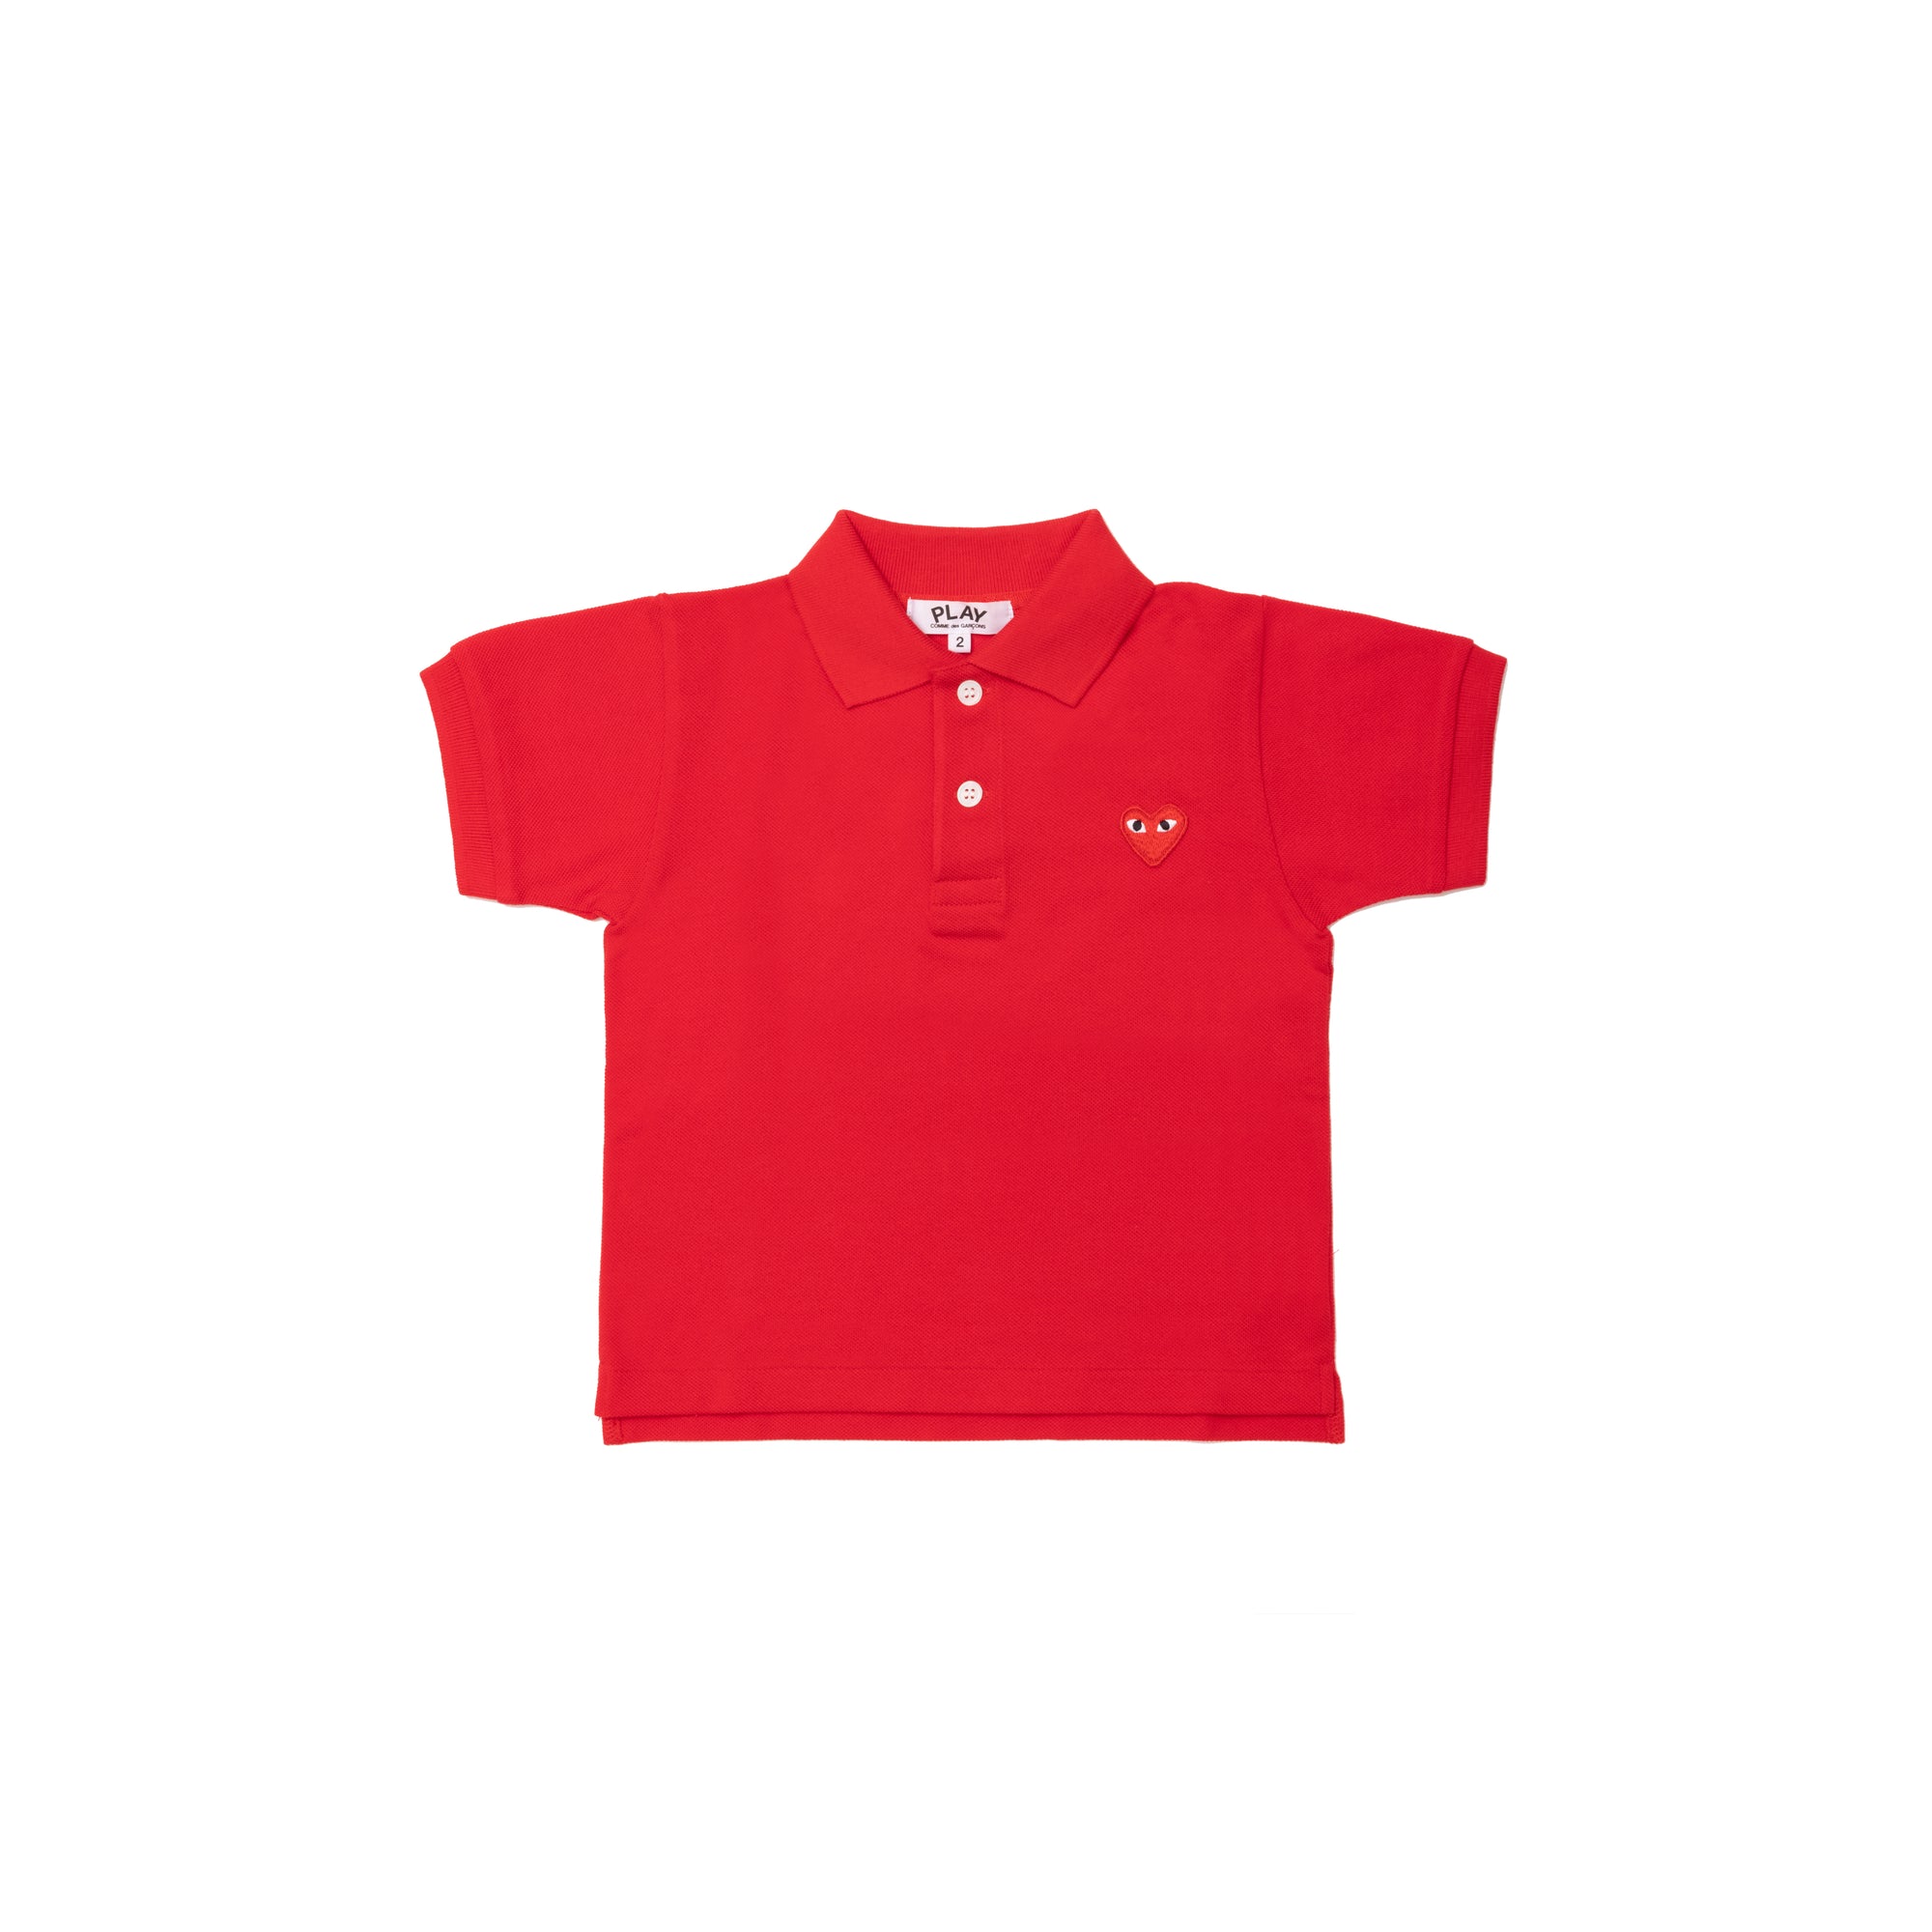 PLAY CDG - KID'S POLO SHIRT - (RED) view 1